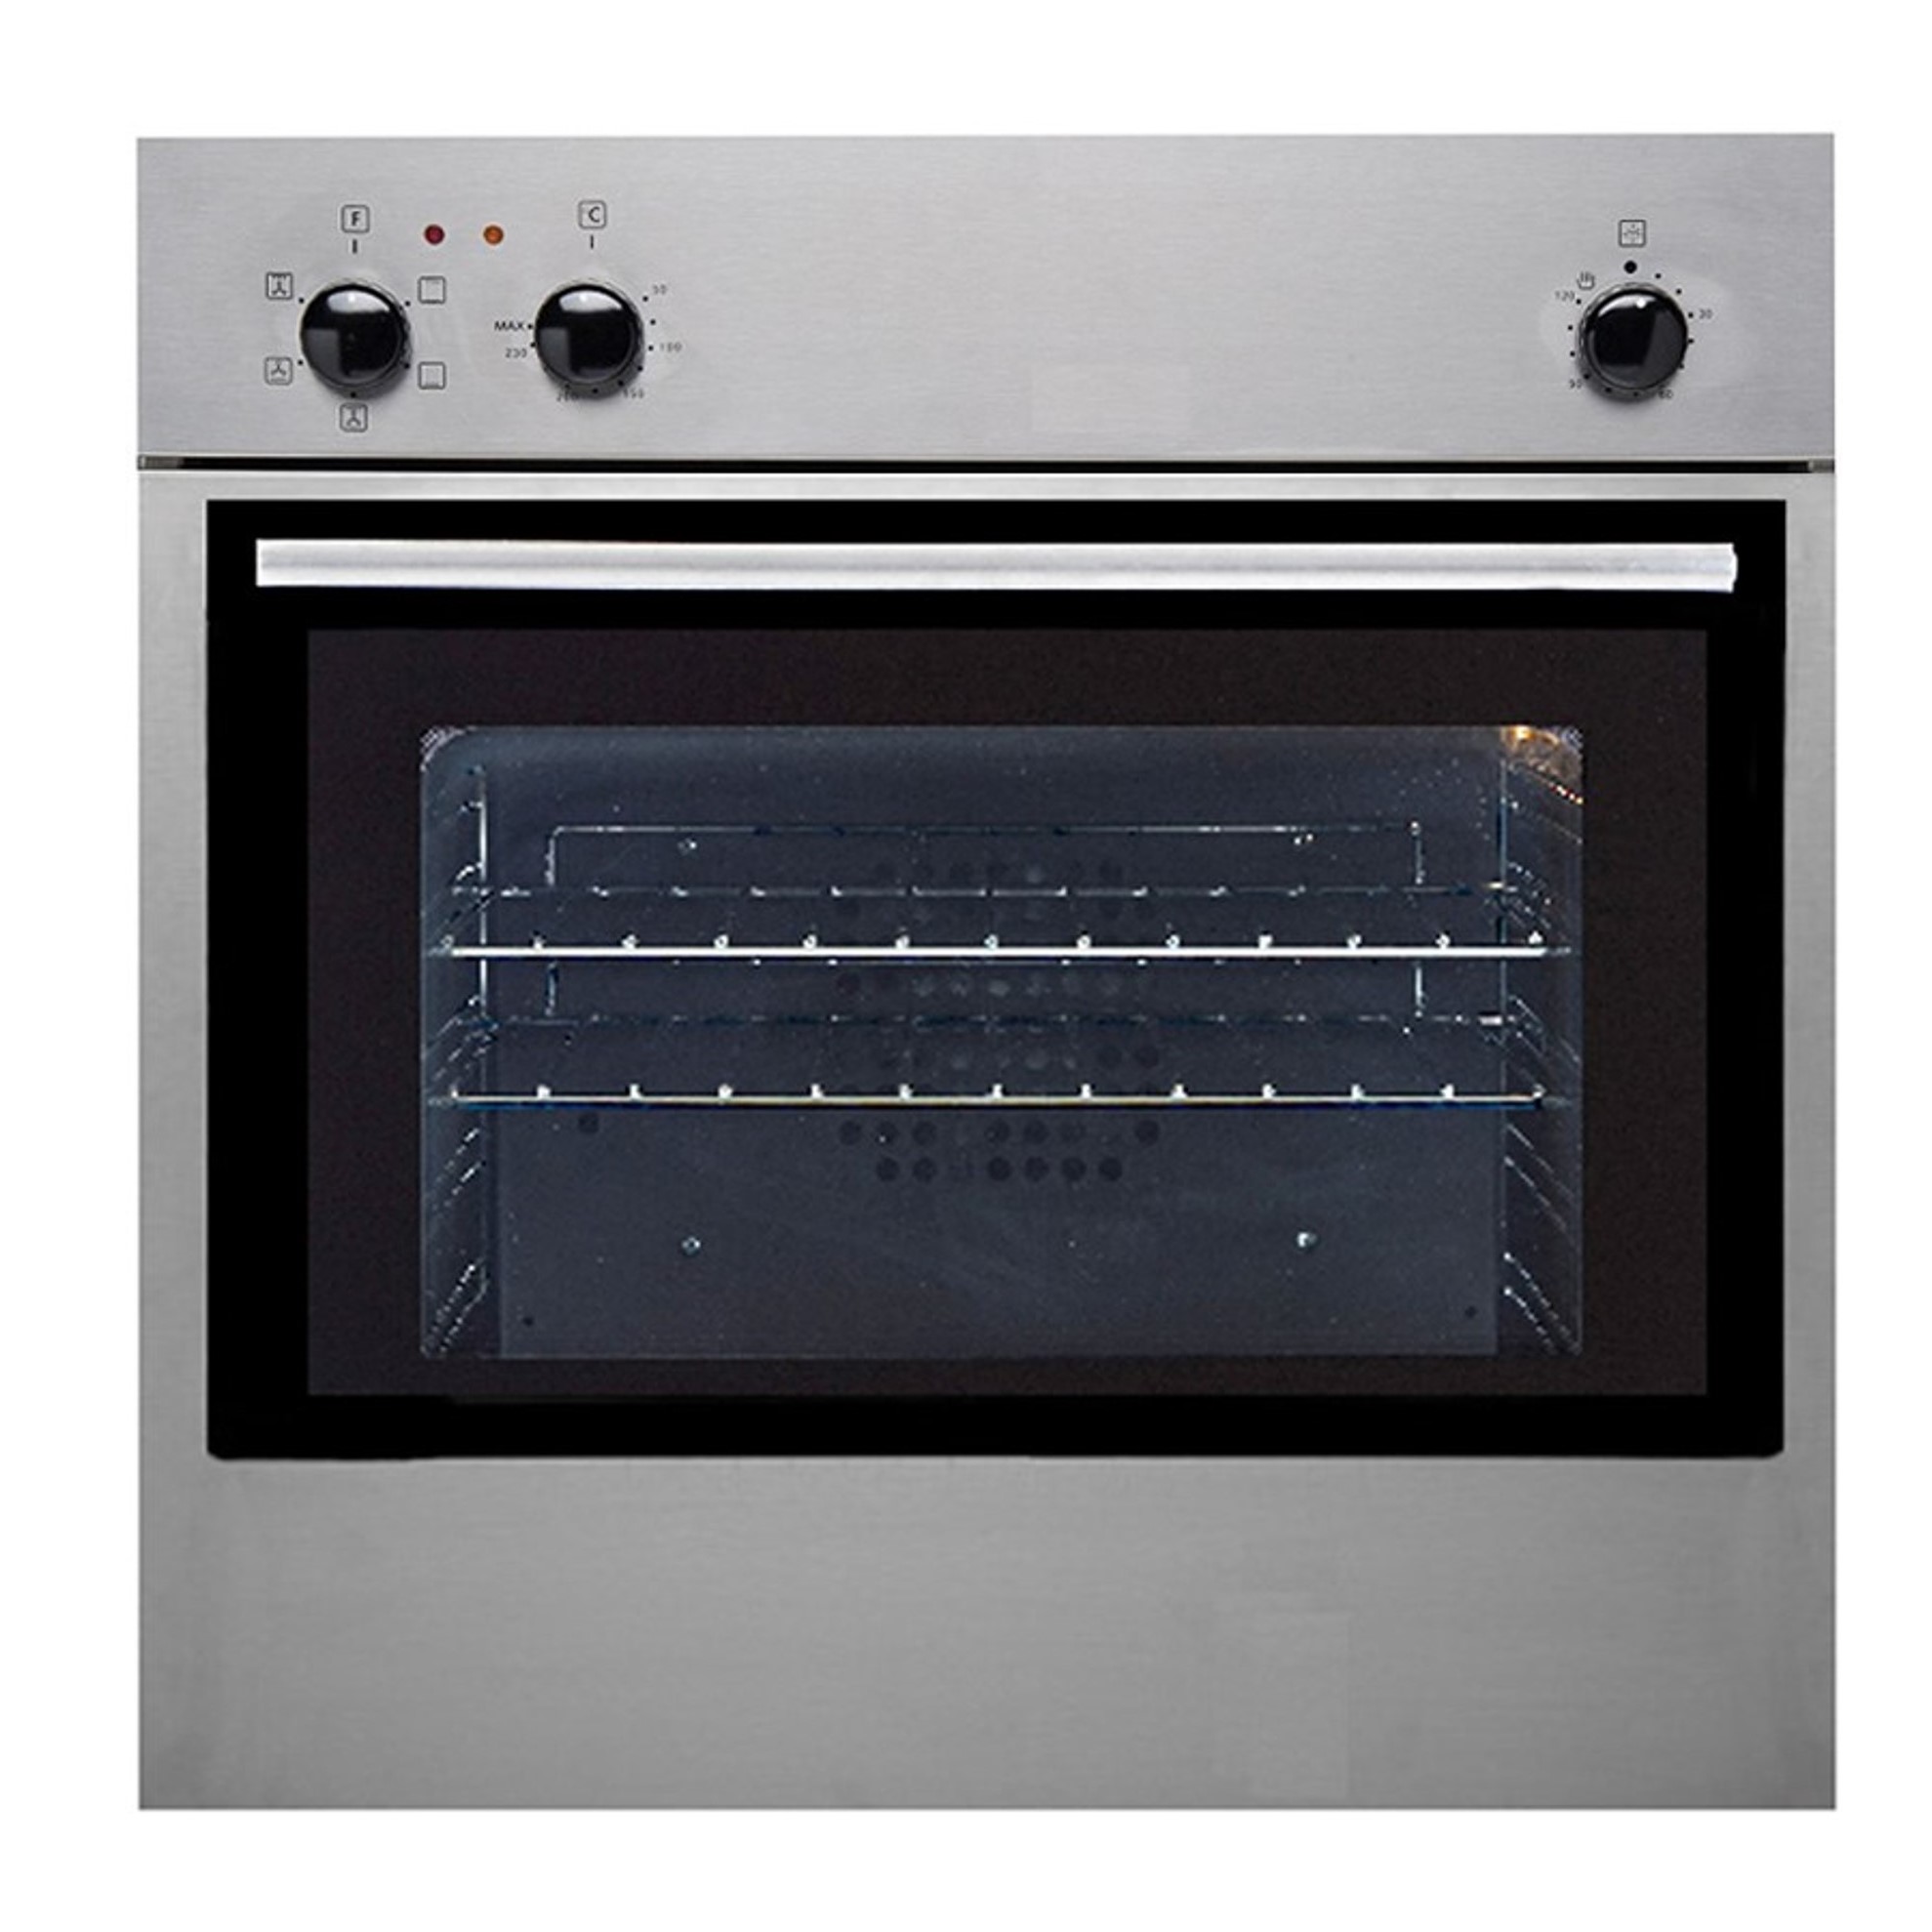 60cm MODENA 5 Function Oven F3205